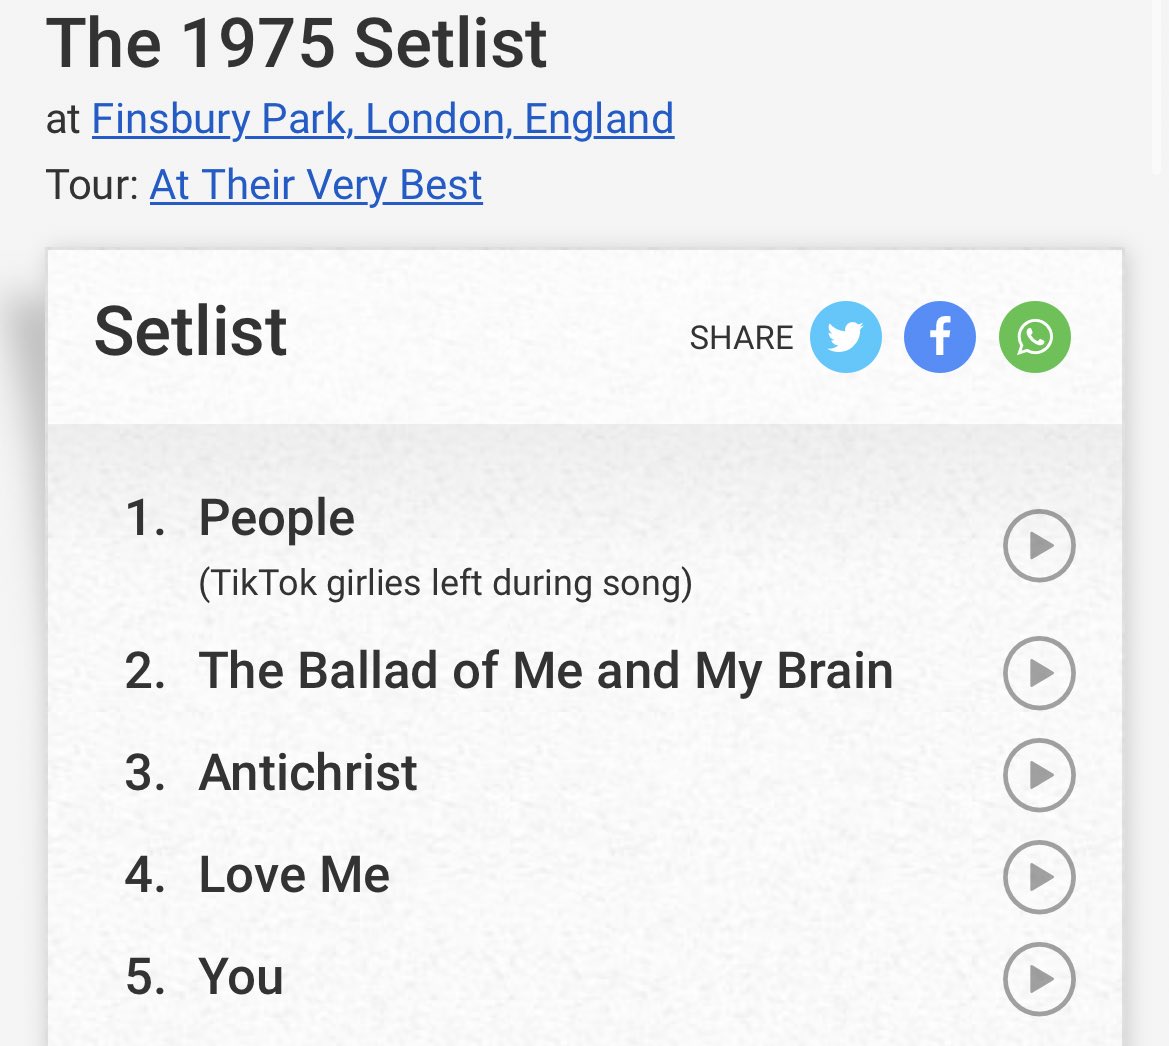 Iris // ⎕ 🪩 on Twitter "Early prediction of The 1975 setlist at